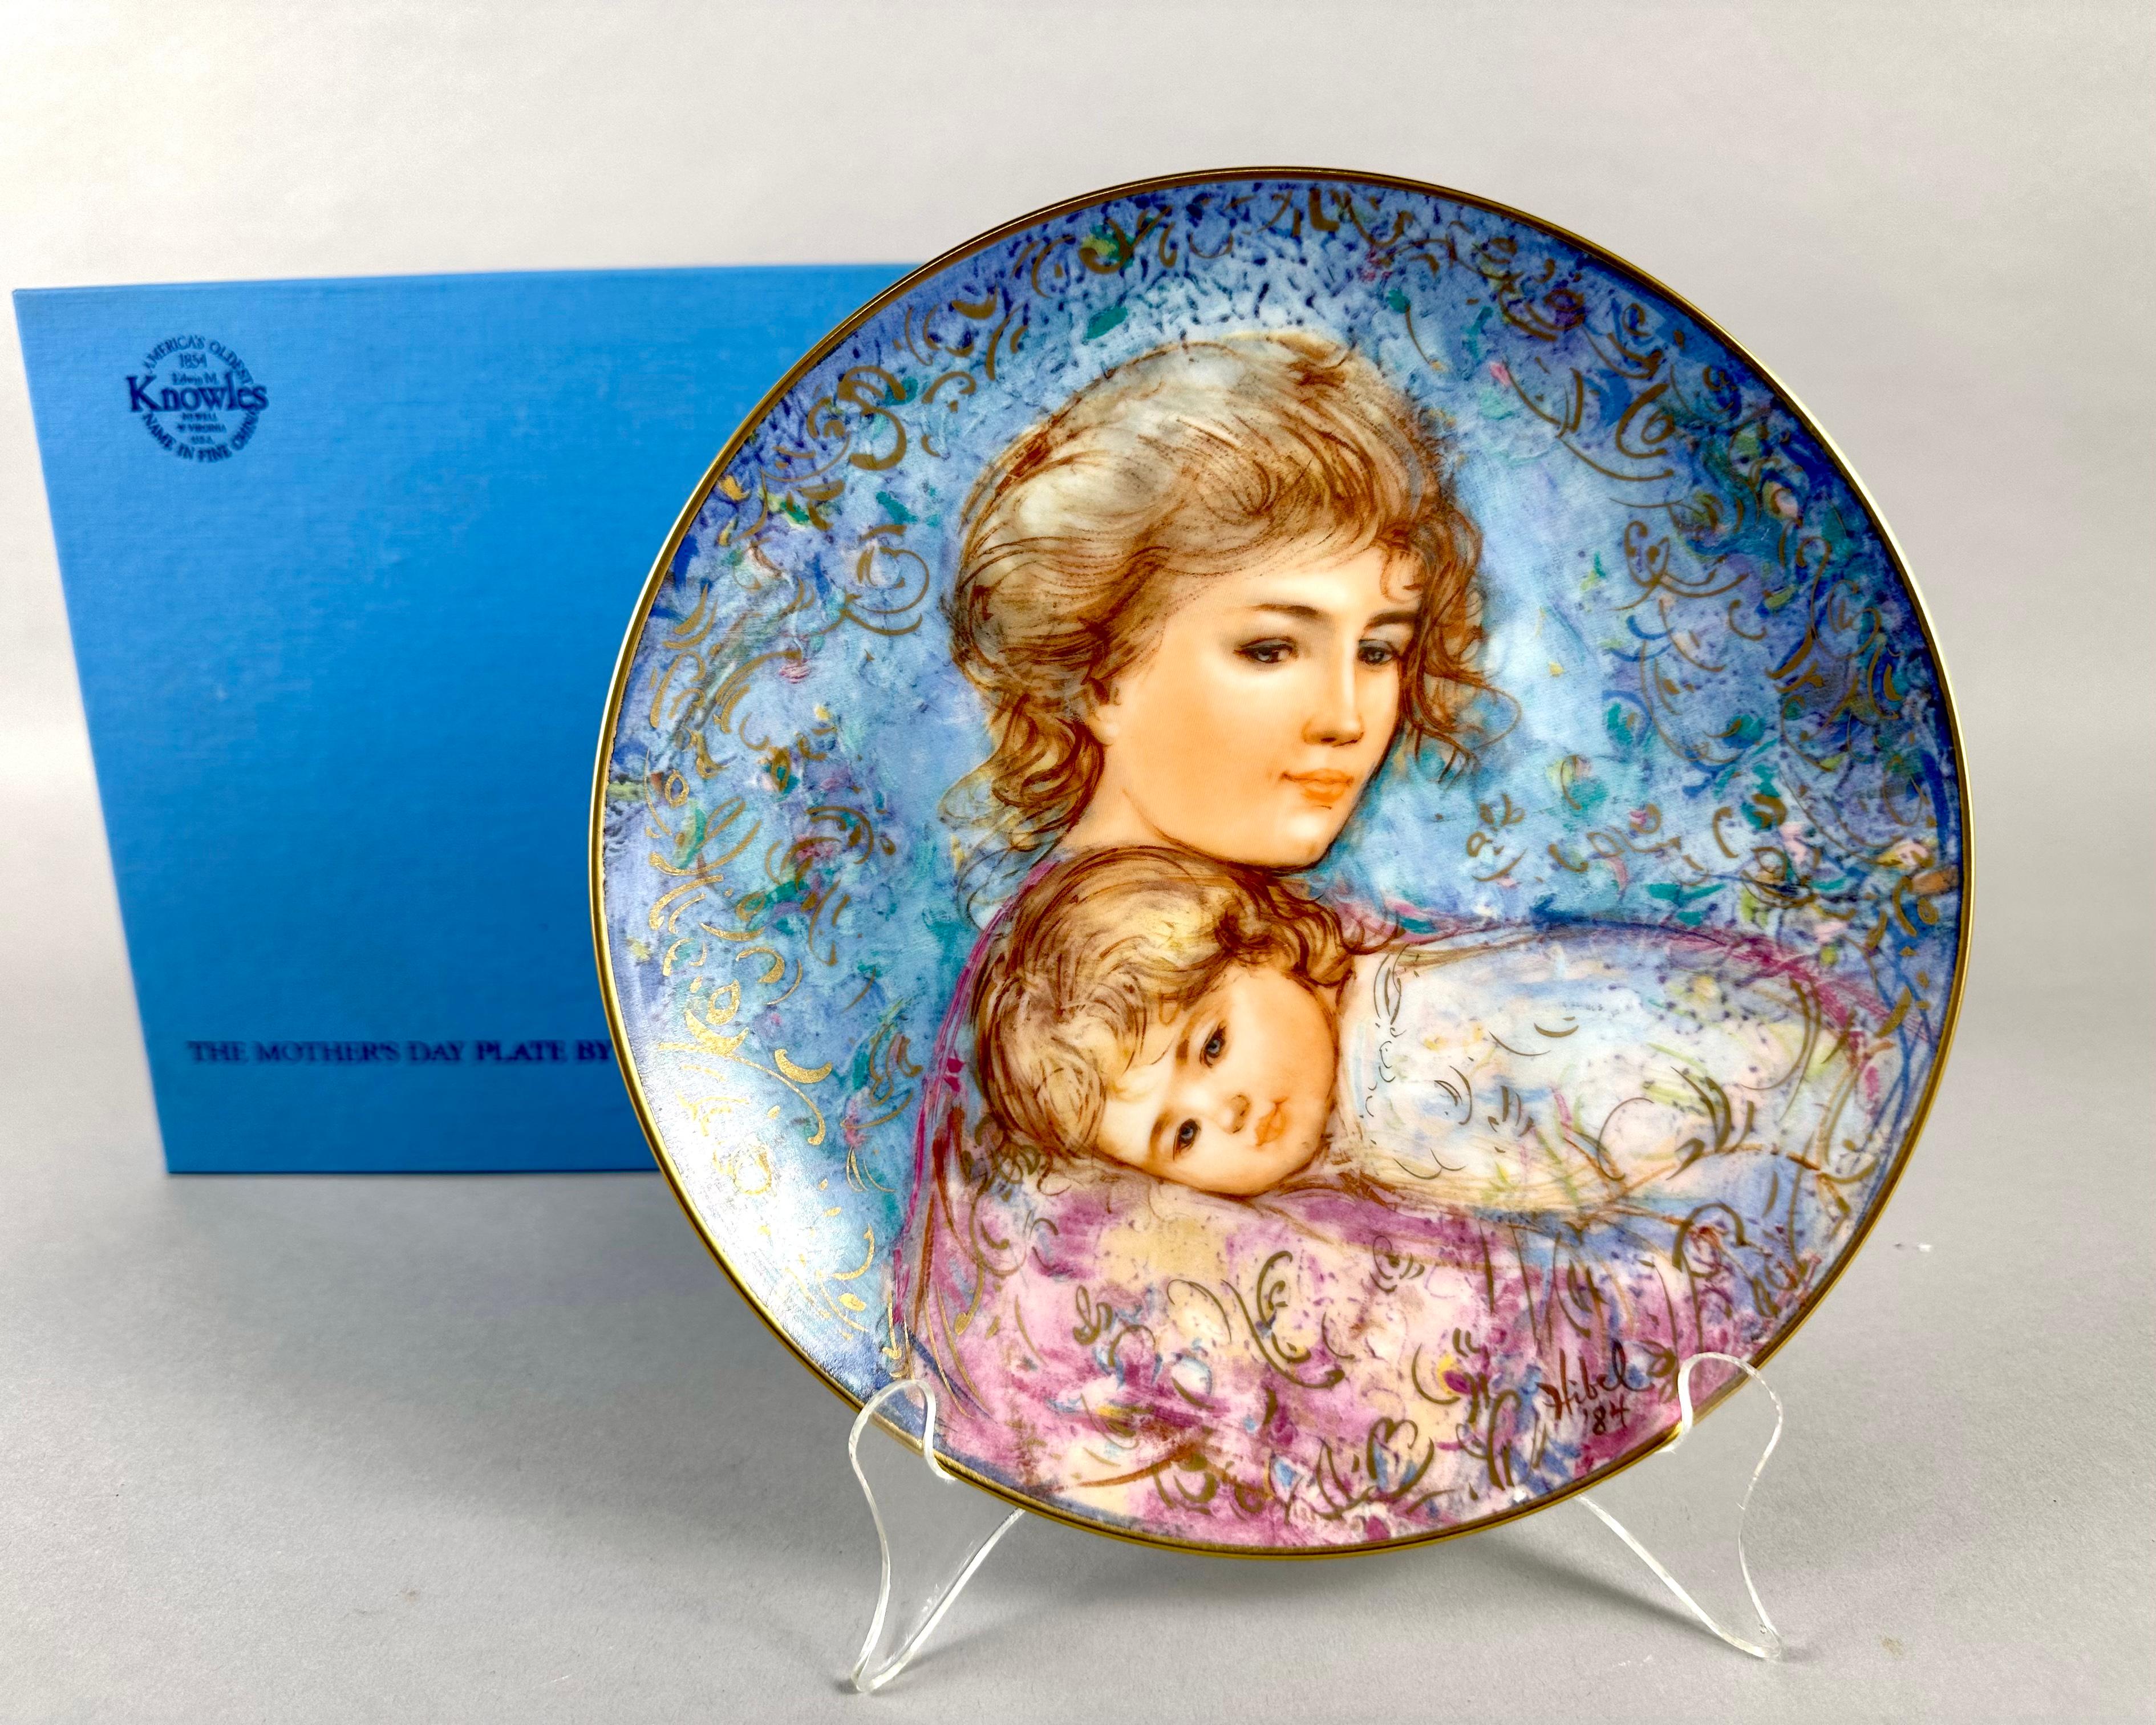 Vintage 1984 Edwin M. Knowles Mother's Day Limited Edition Collectible Plates created exclusively by Edna Hibel.

These fine china plates are nice and titled “Abby and Lisa